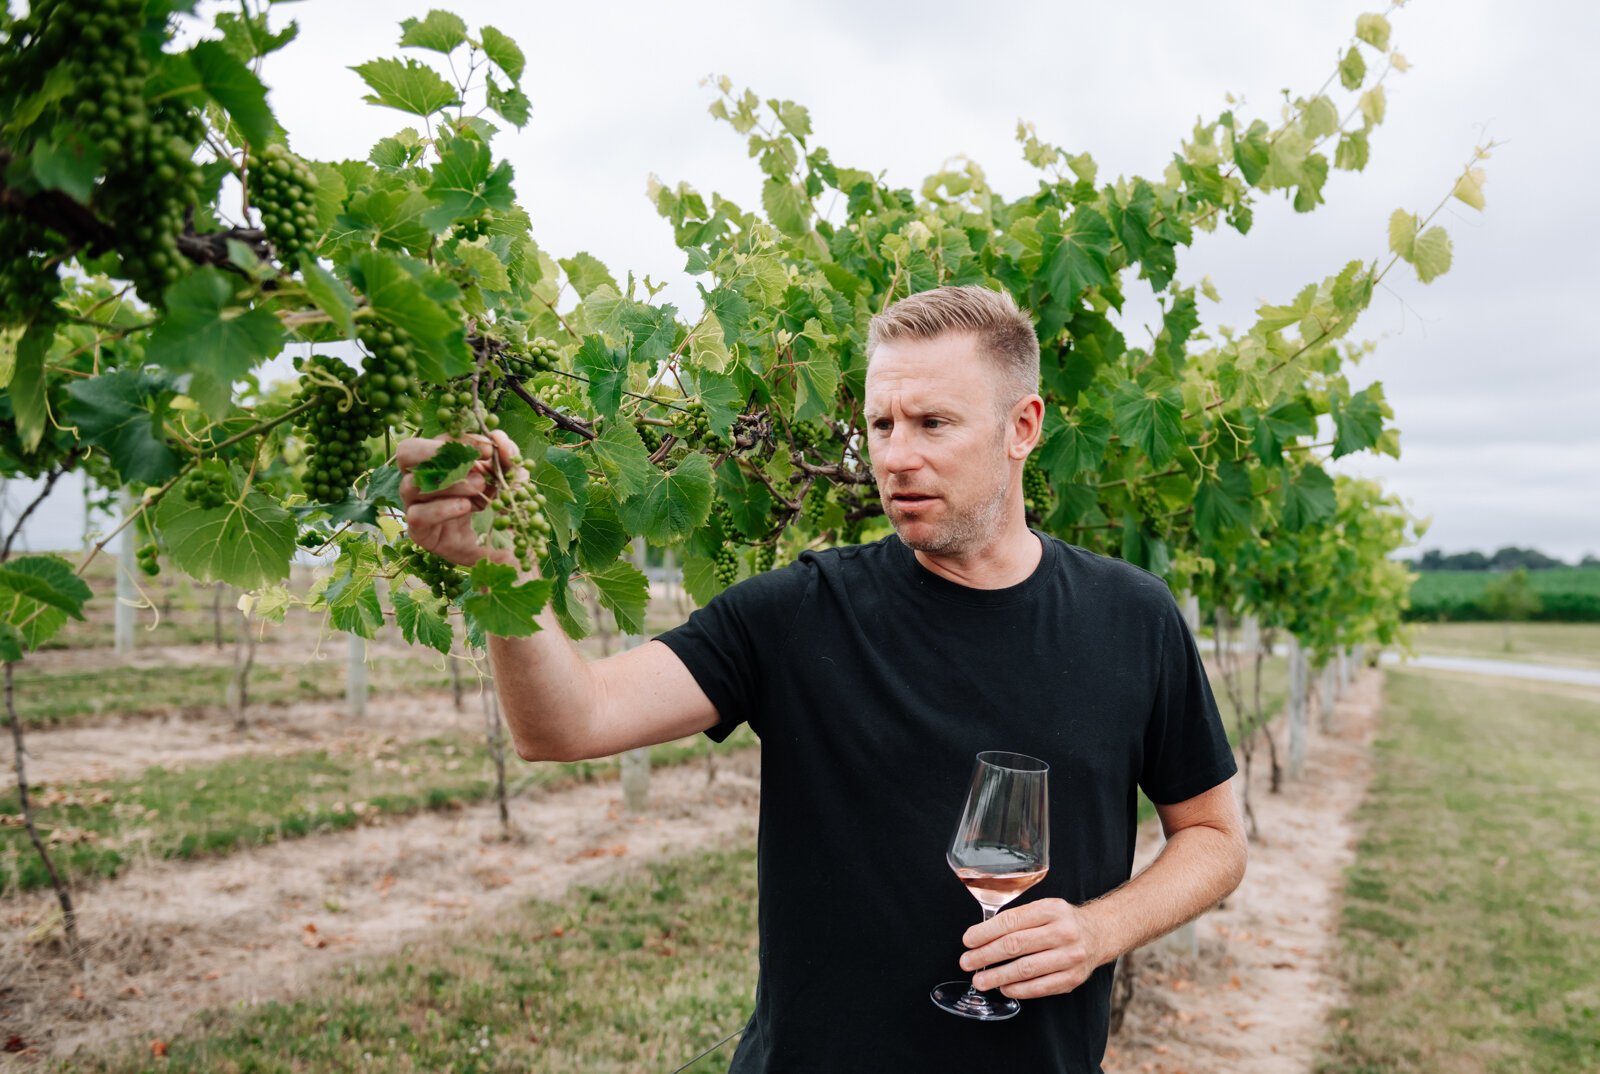 Owner Shane Christ looks at the Seyval Blanc grapes at Hartland Winery.